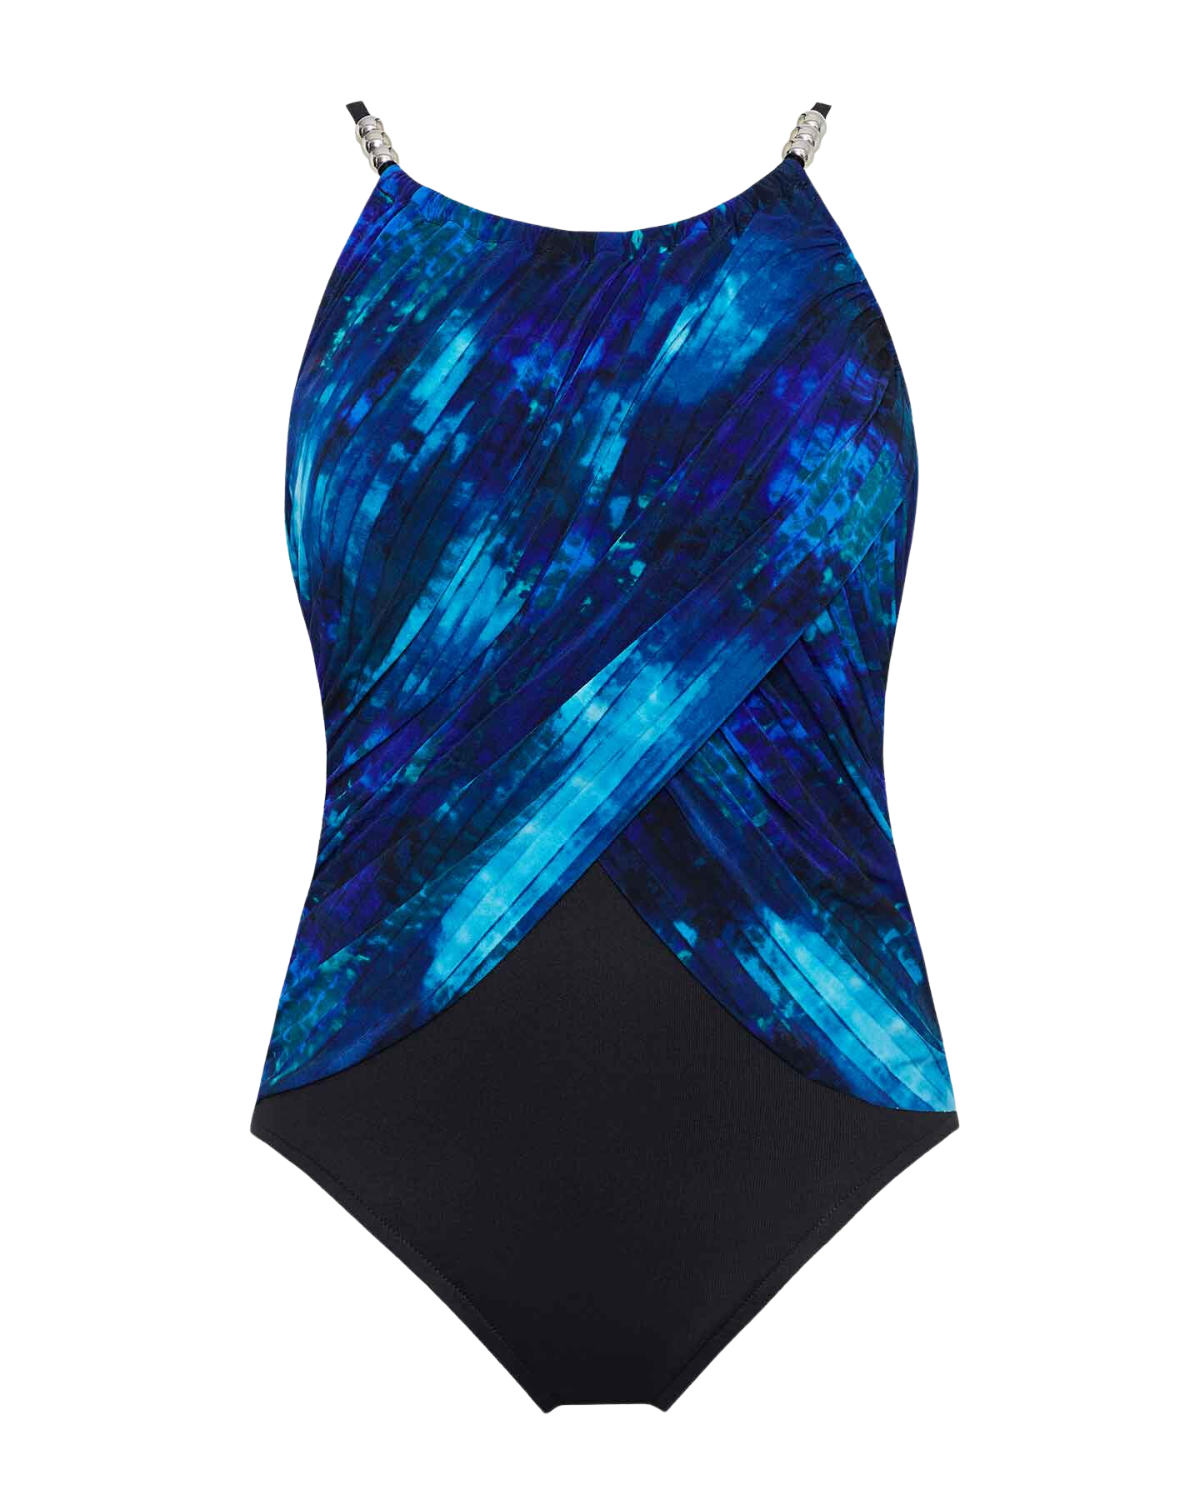 flat lay of a one piece high neck swimsuit in a black, blue, navy and white abstract print